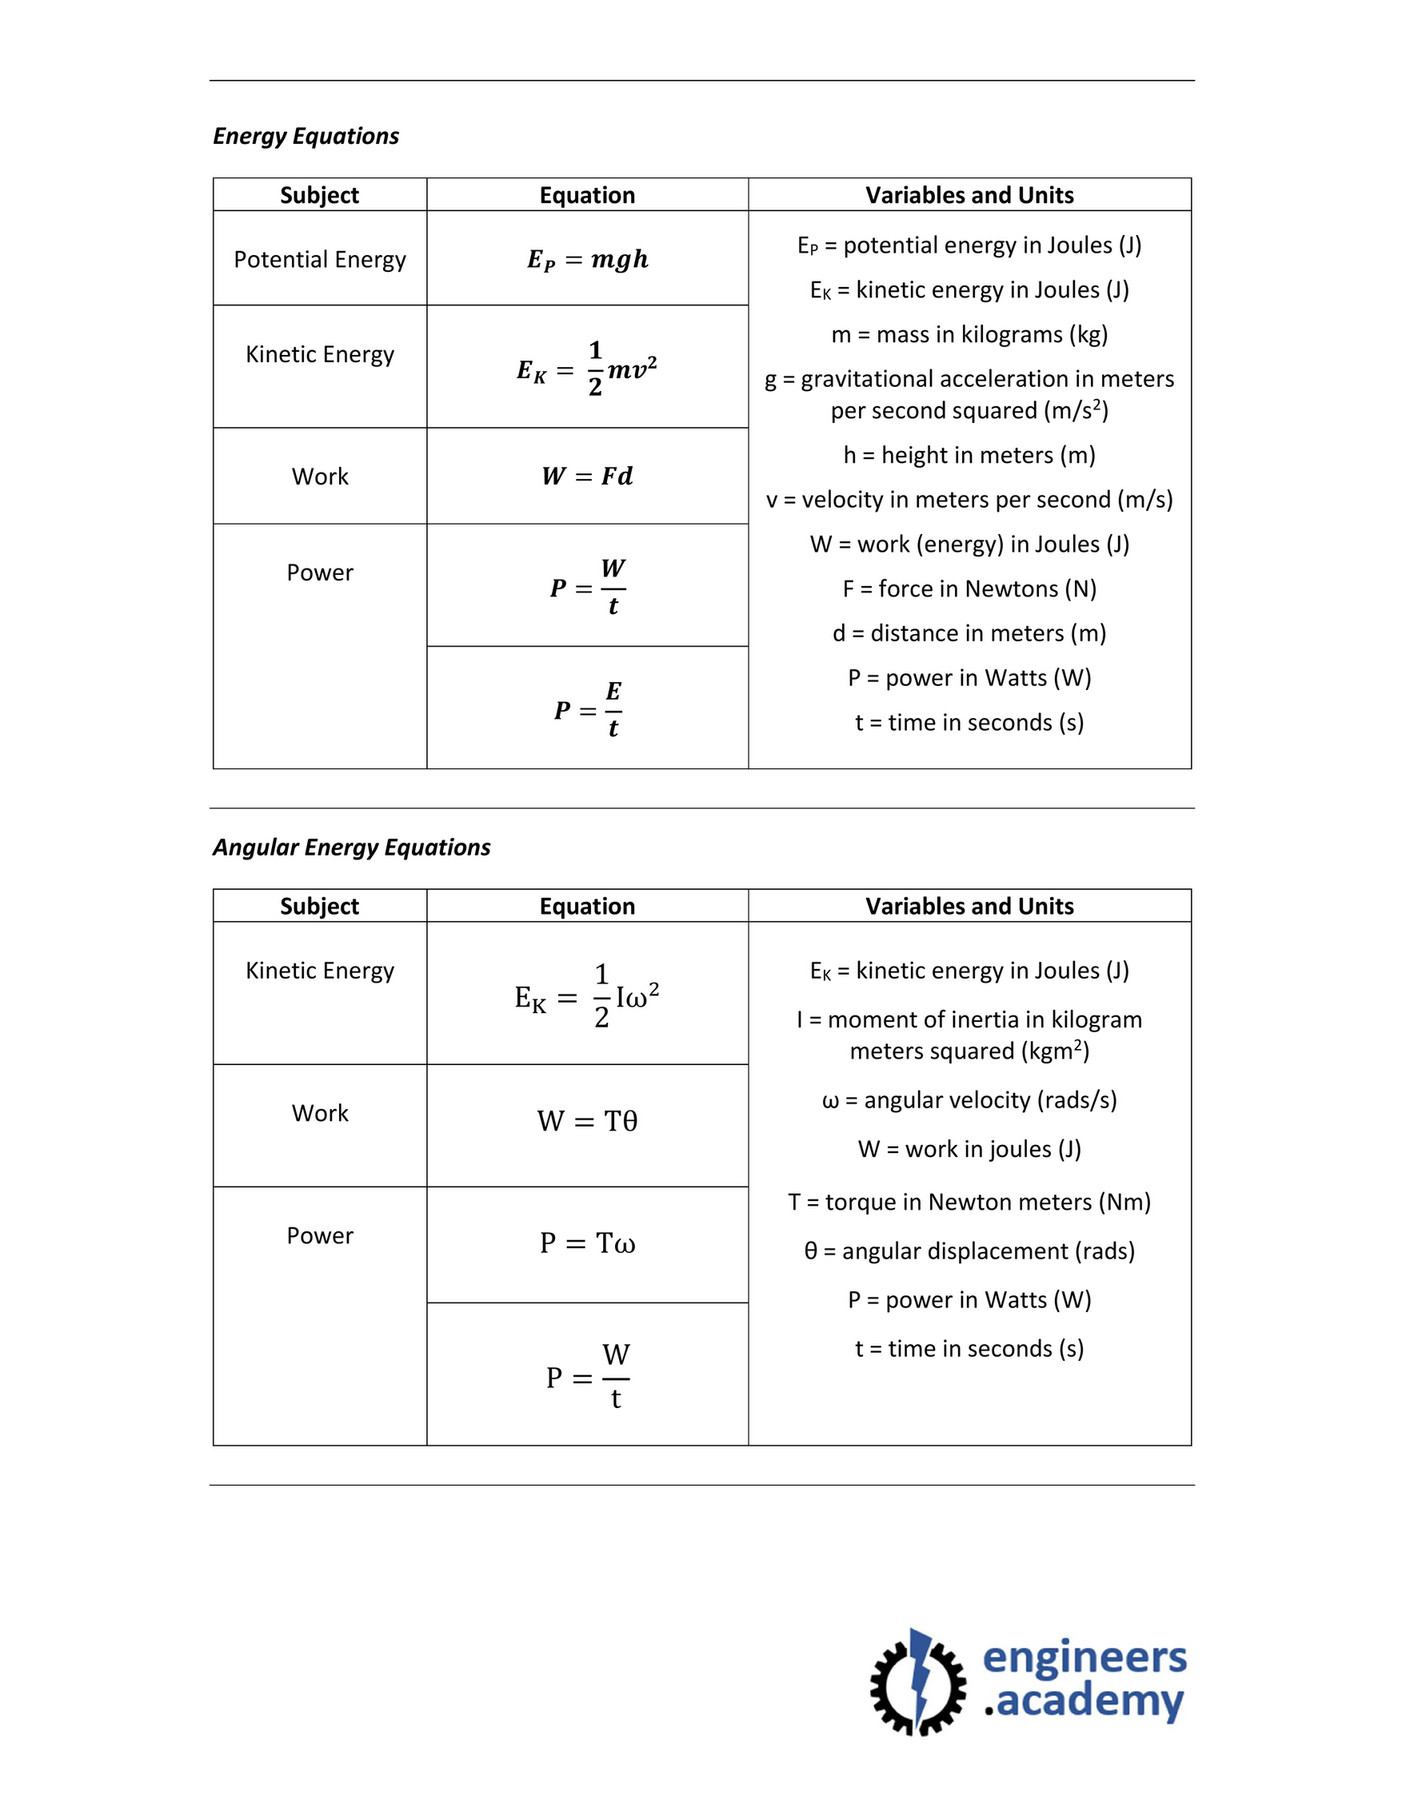 My Publications Level 3 Engineering Principles Dynamic Systems Equations Sheet Page 1 Created With Publitas Com